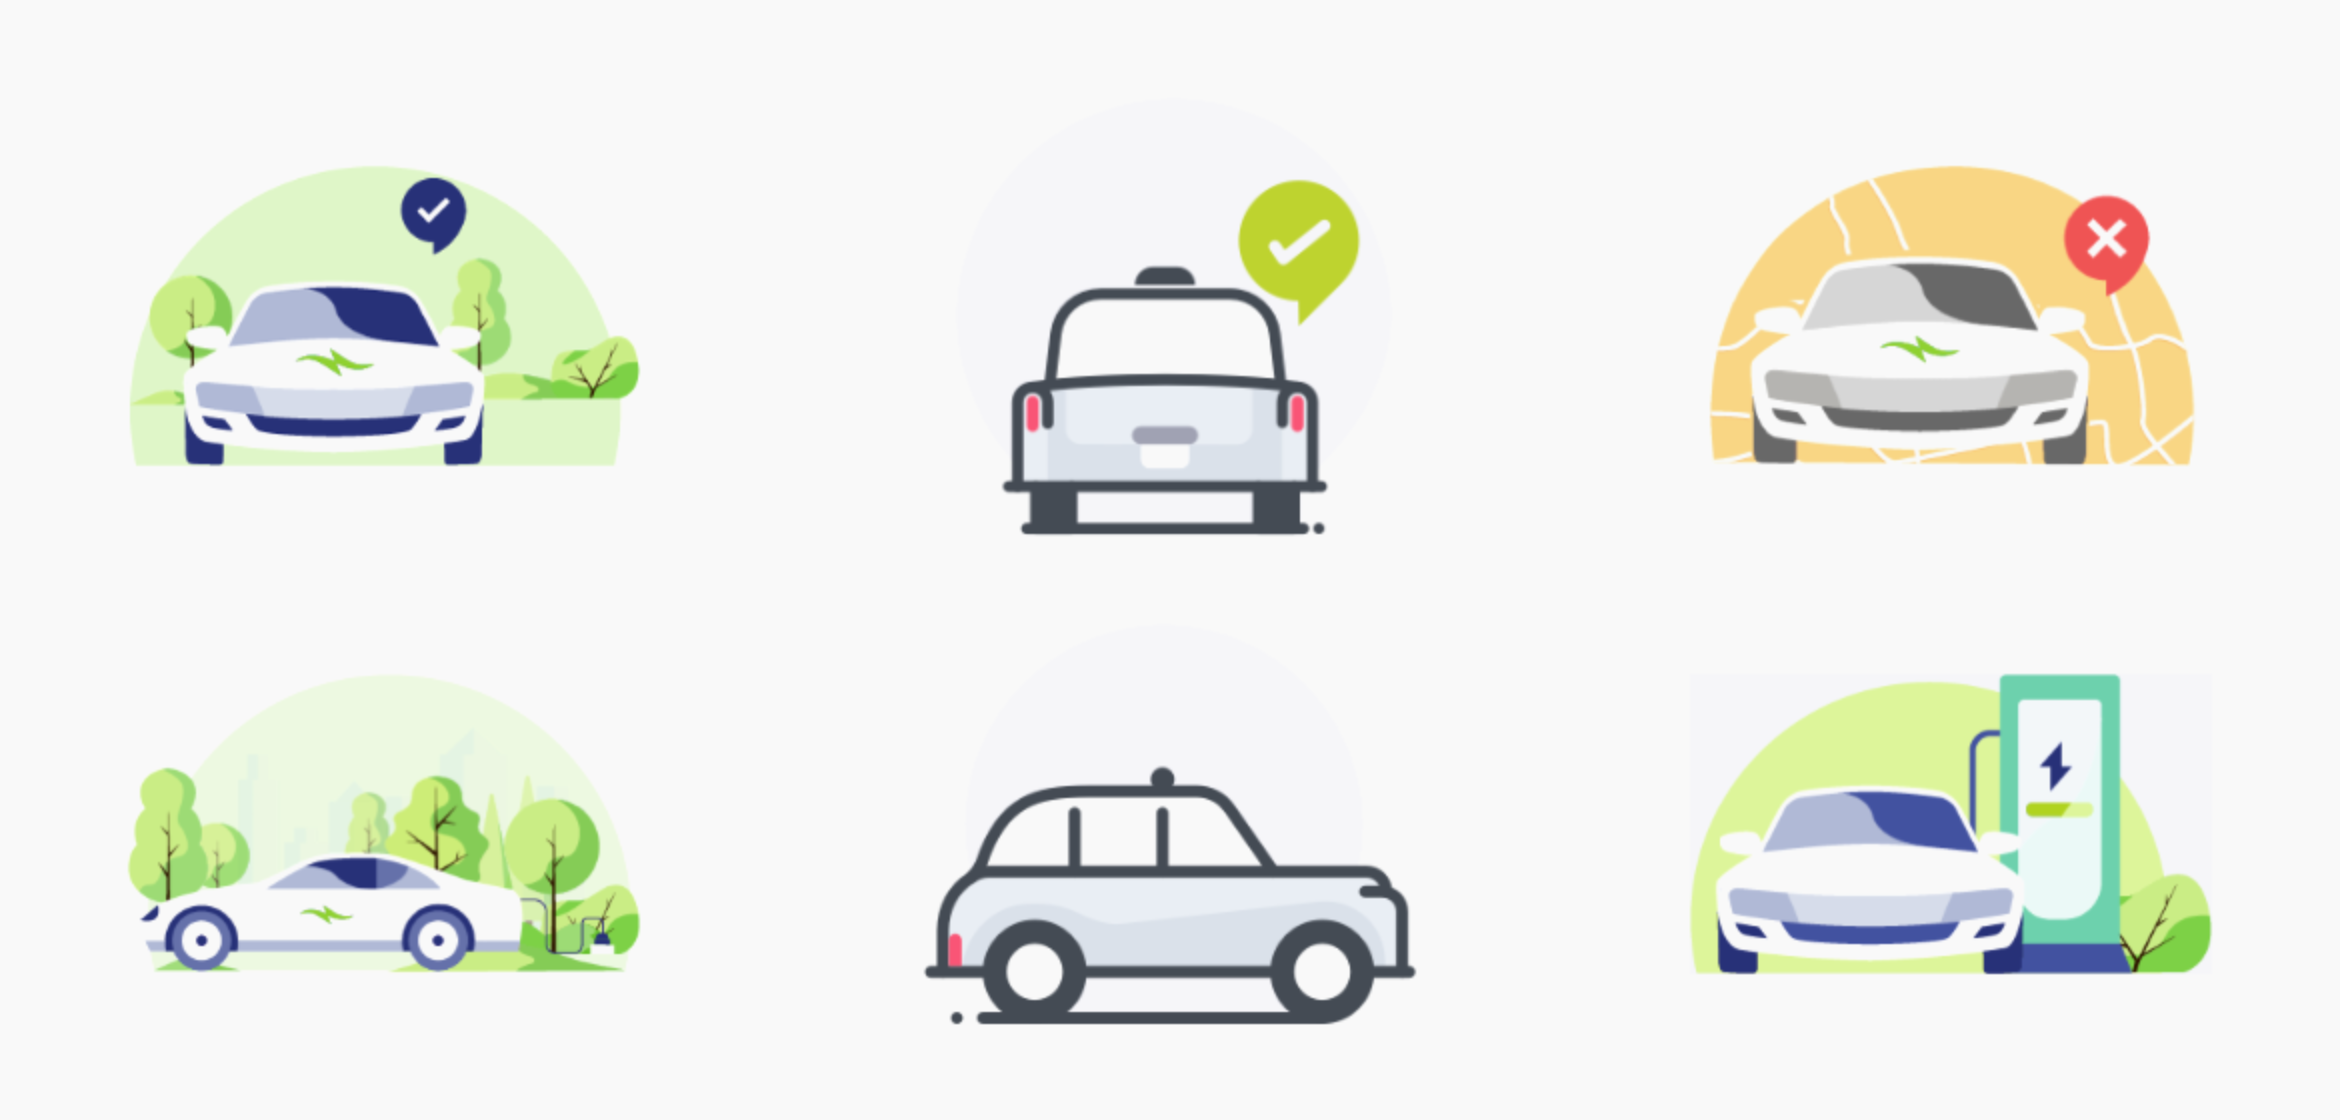 Illustration of Cab and Taxi Booking APplication